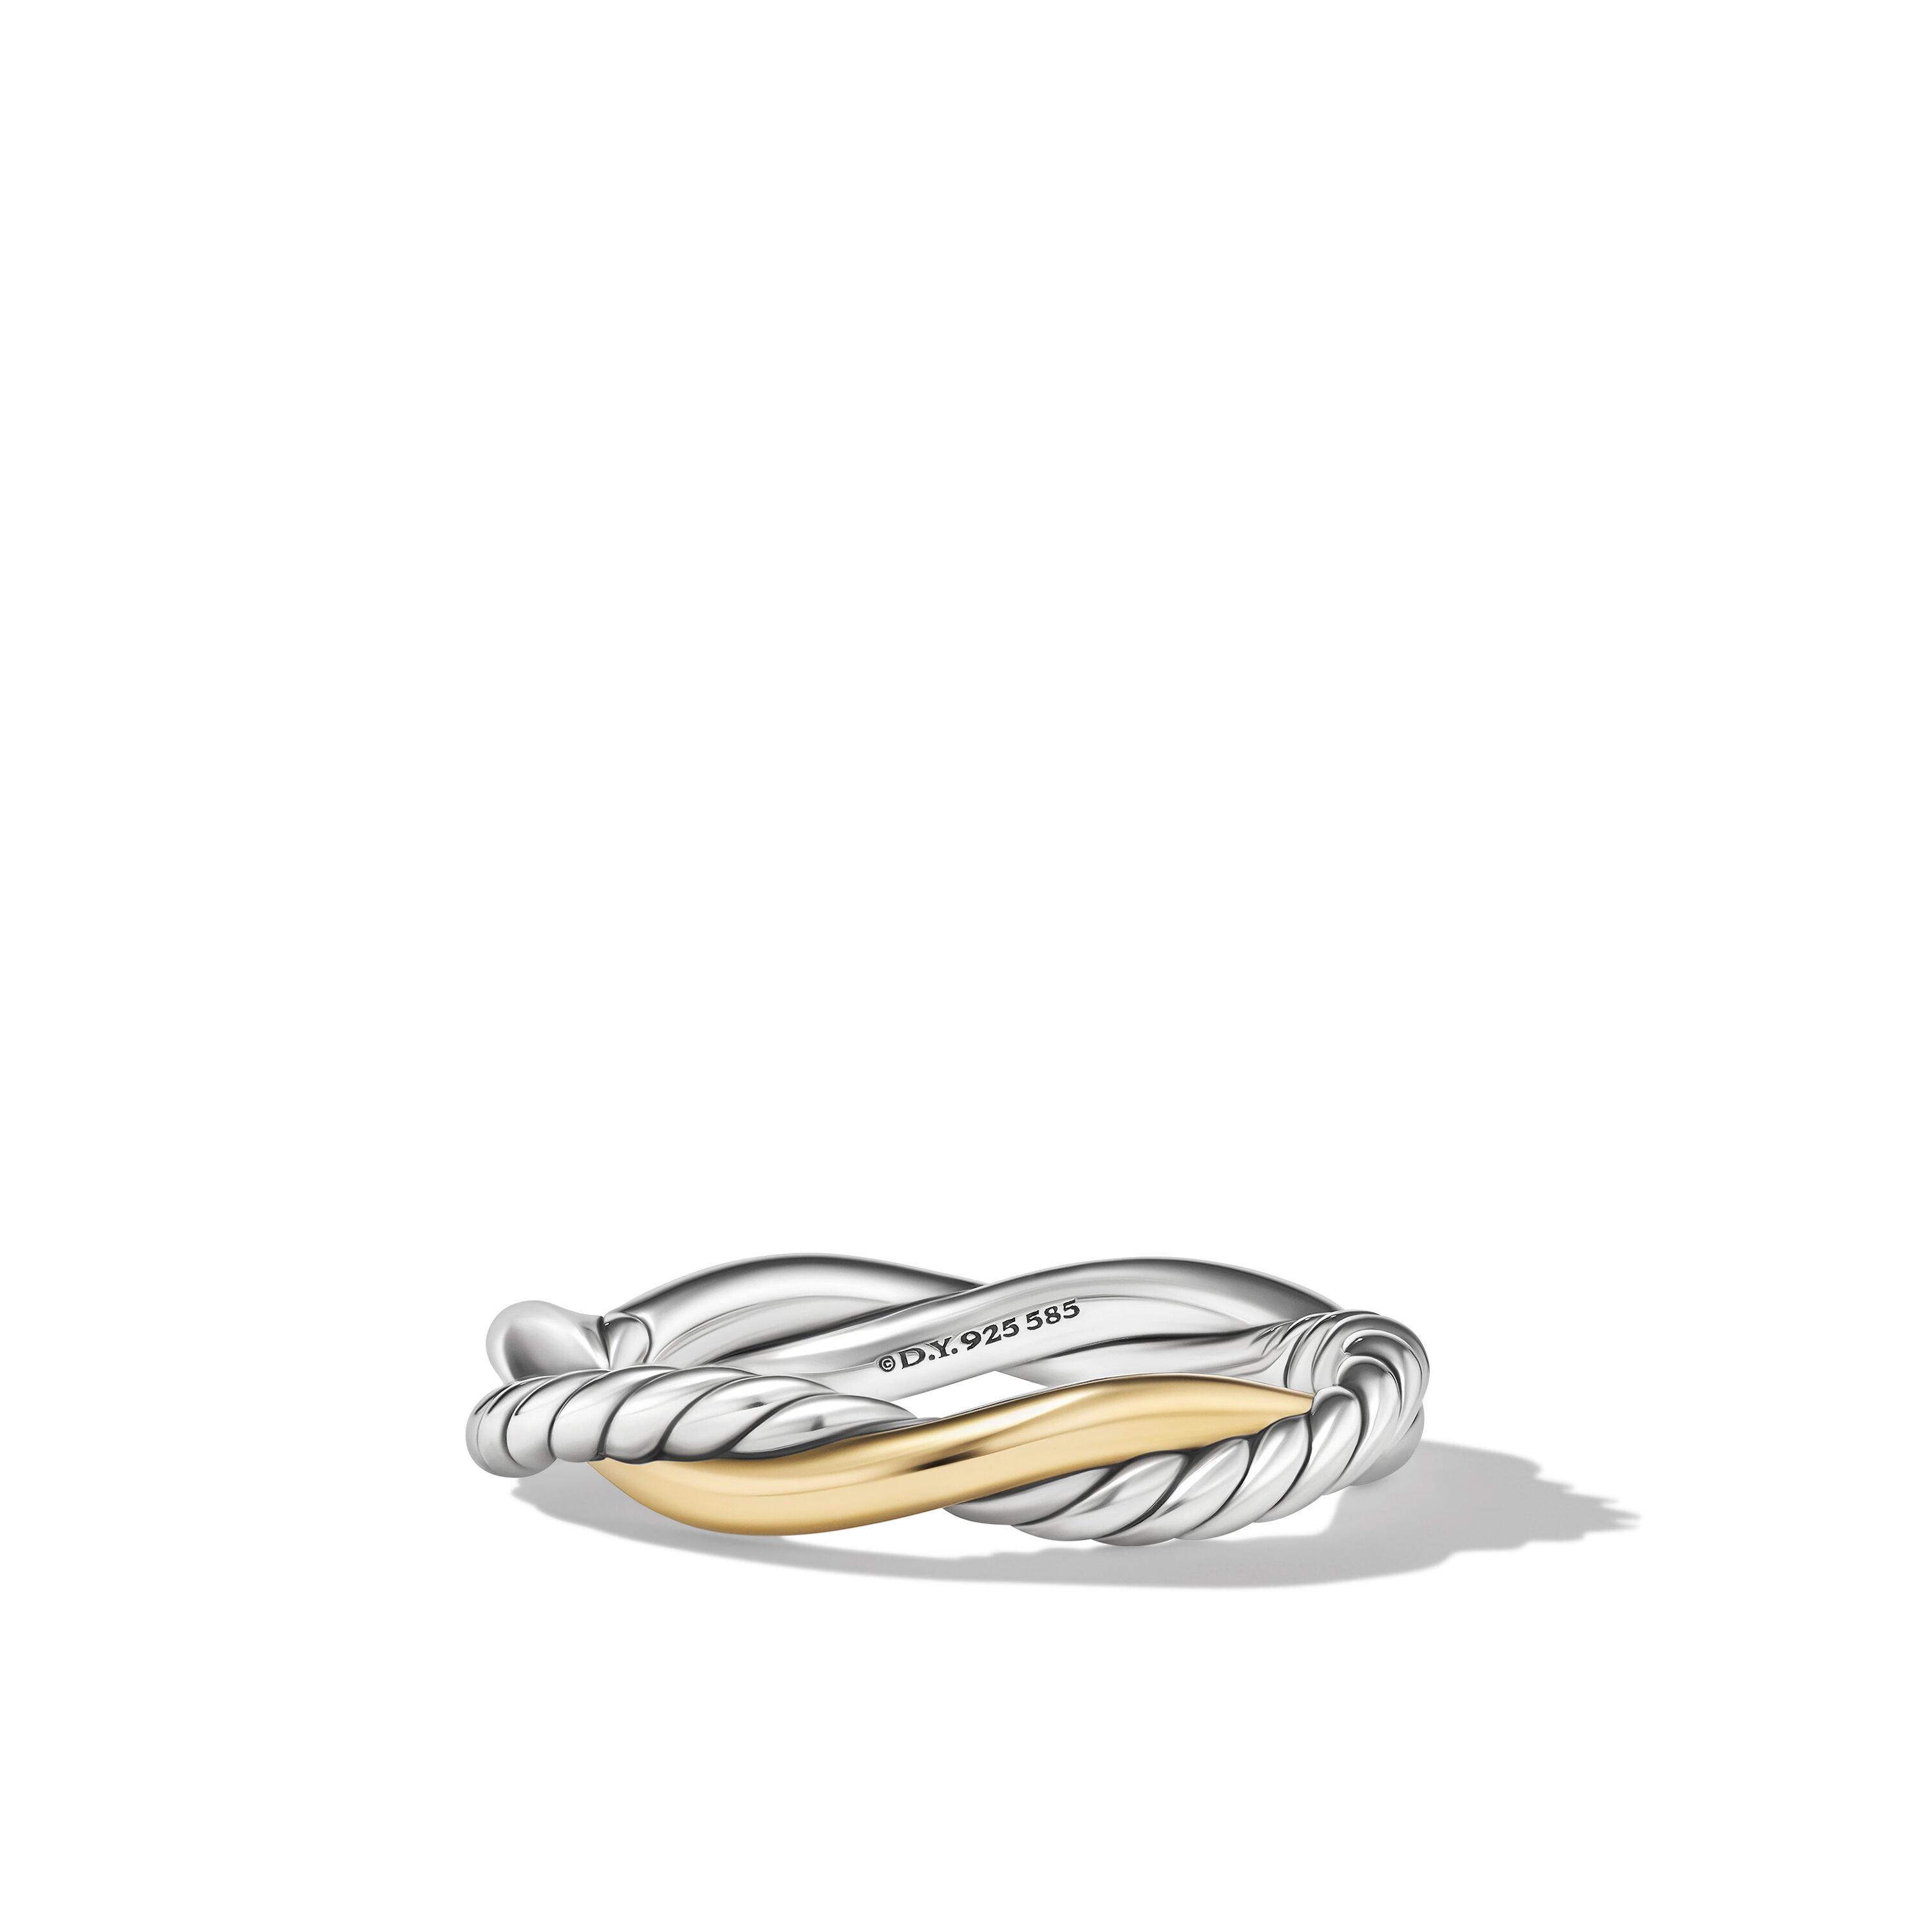 David Yurman Petite Infinity Band Ring in Sterling Silver with Yellow Gold, size 7 0